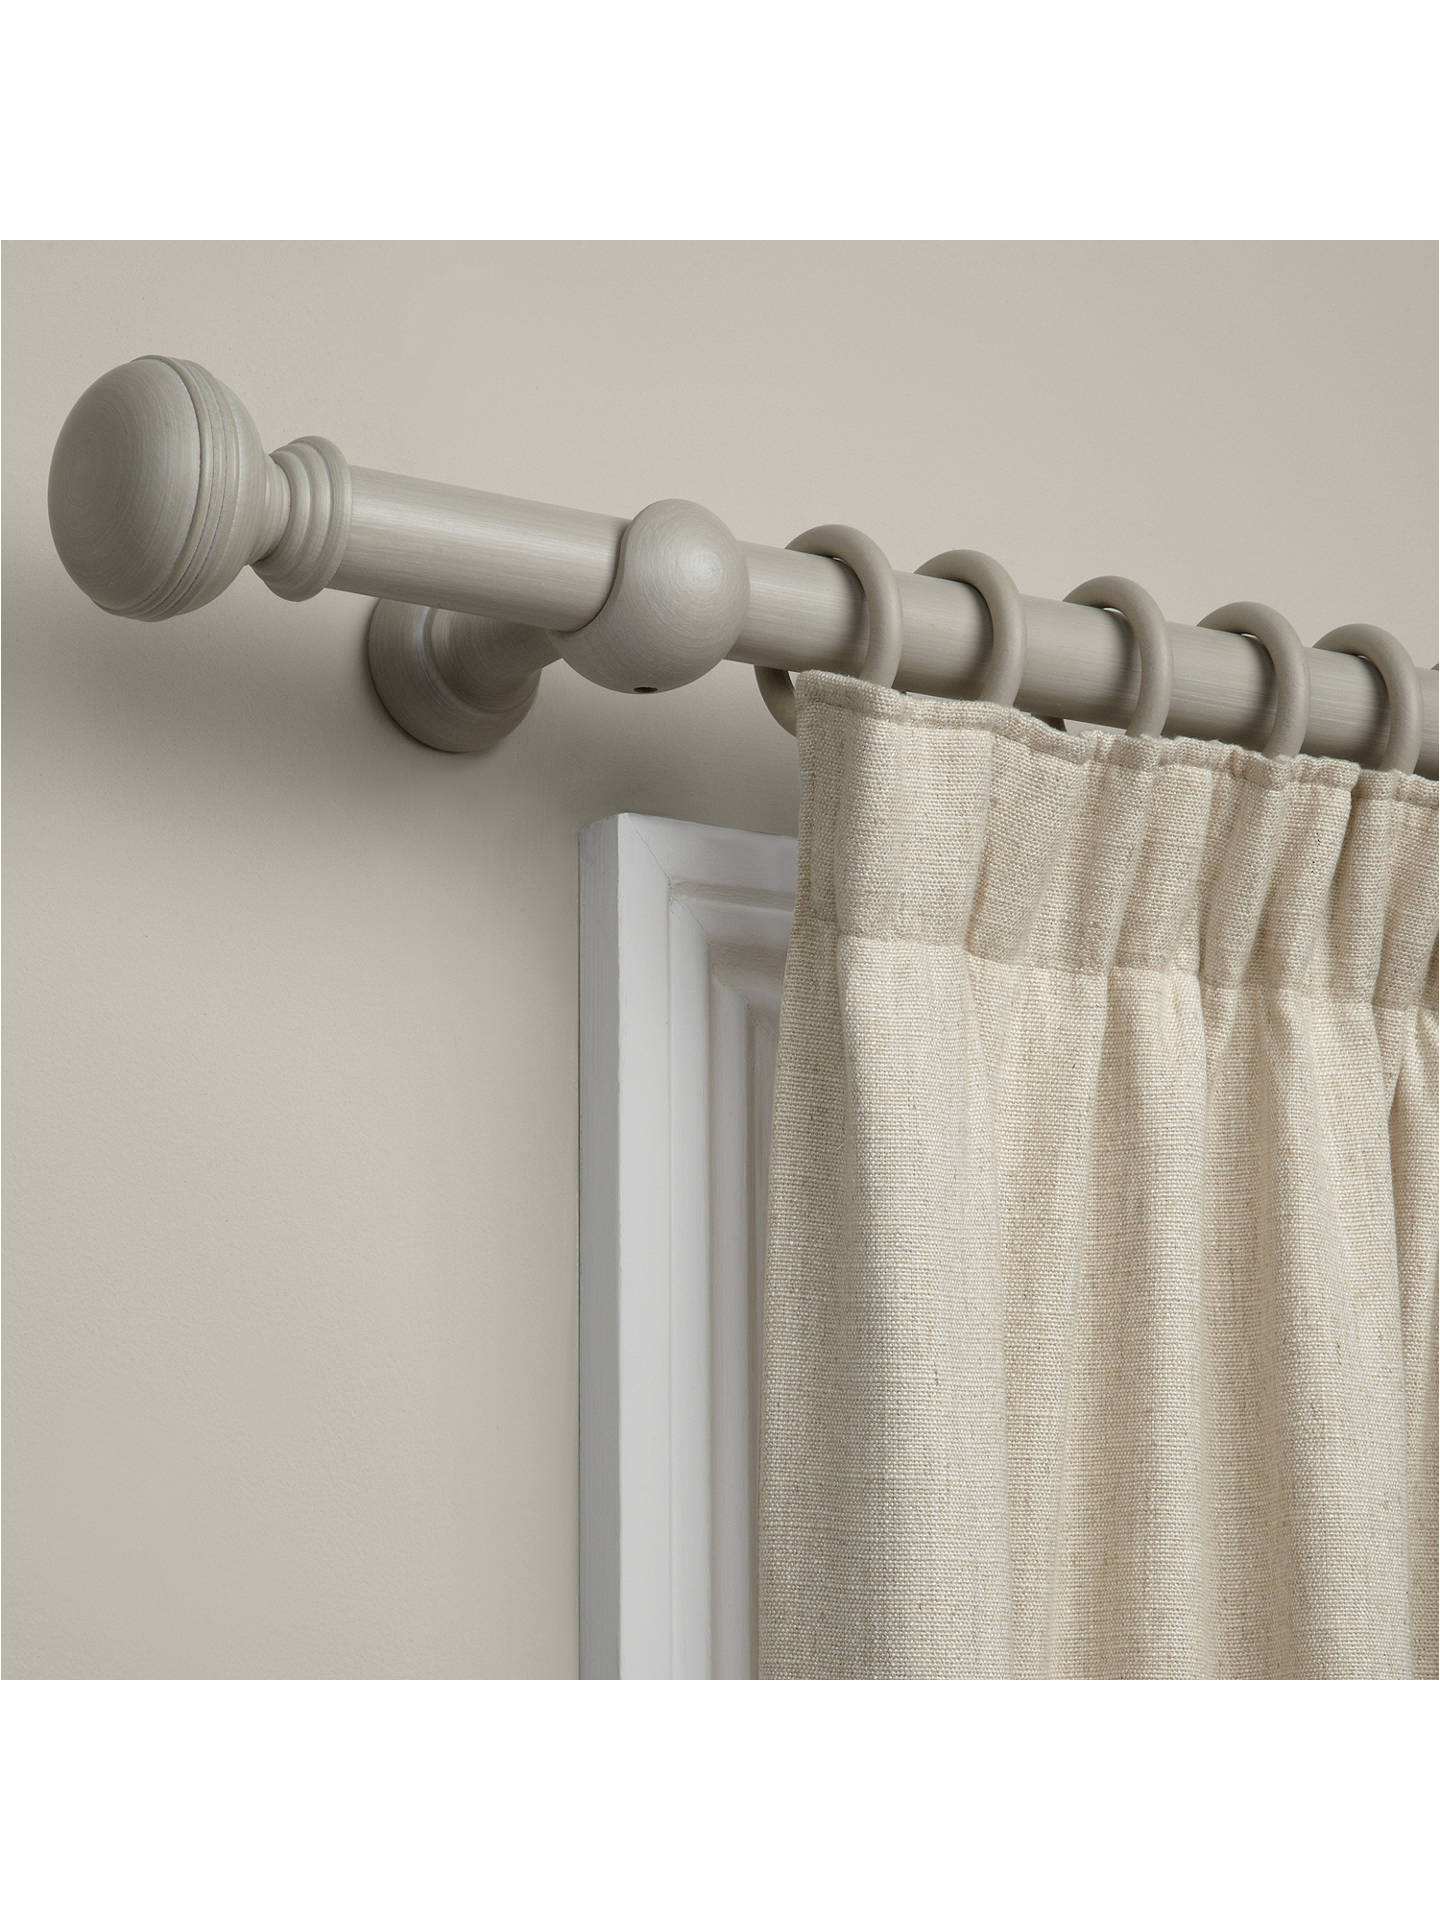 buycroft collection curtain pole kit grey l150cm x dia 35mm online at johnlewis